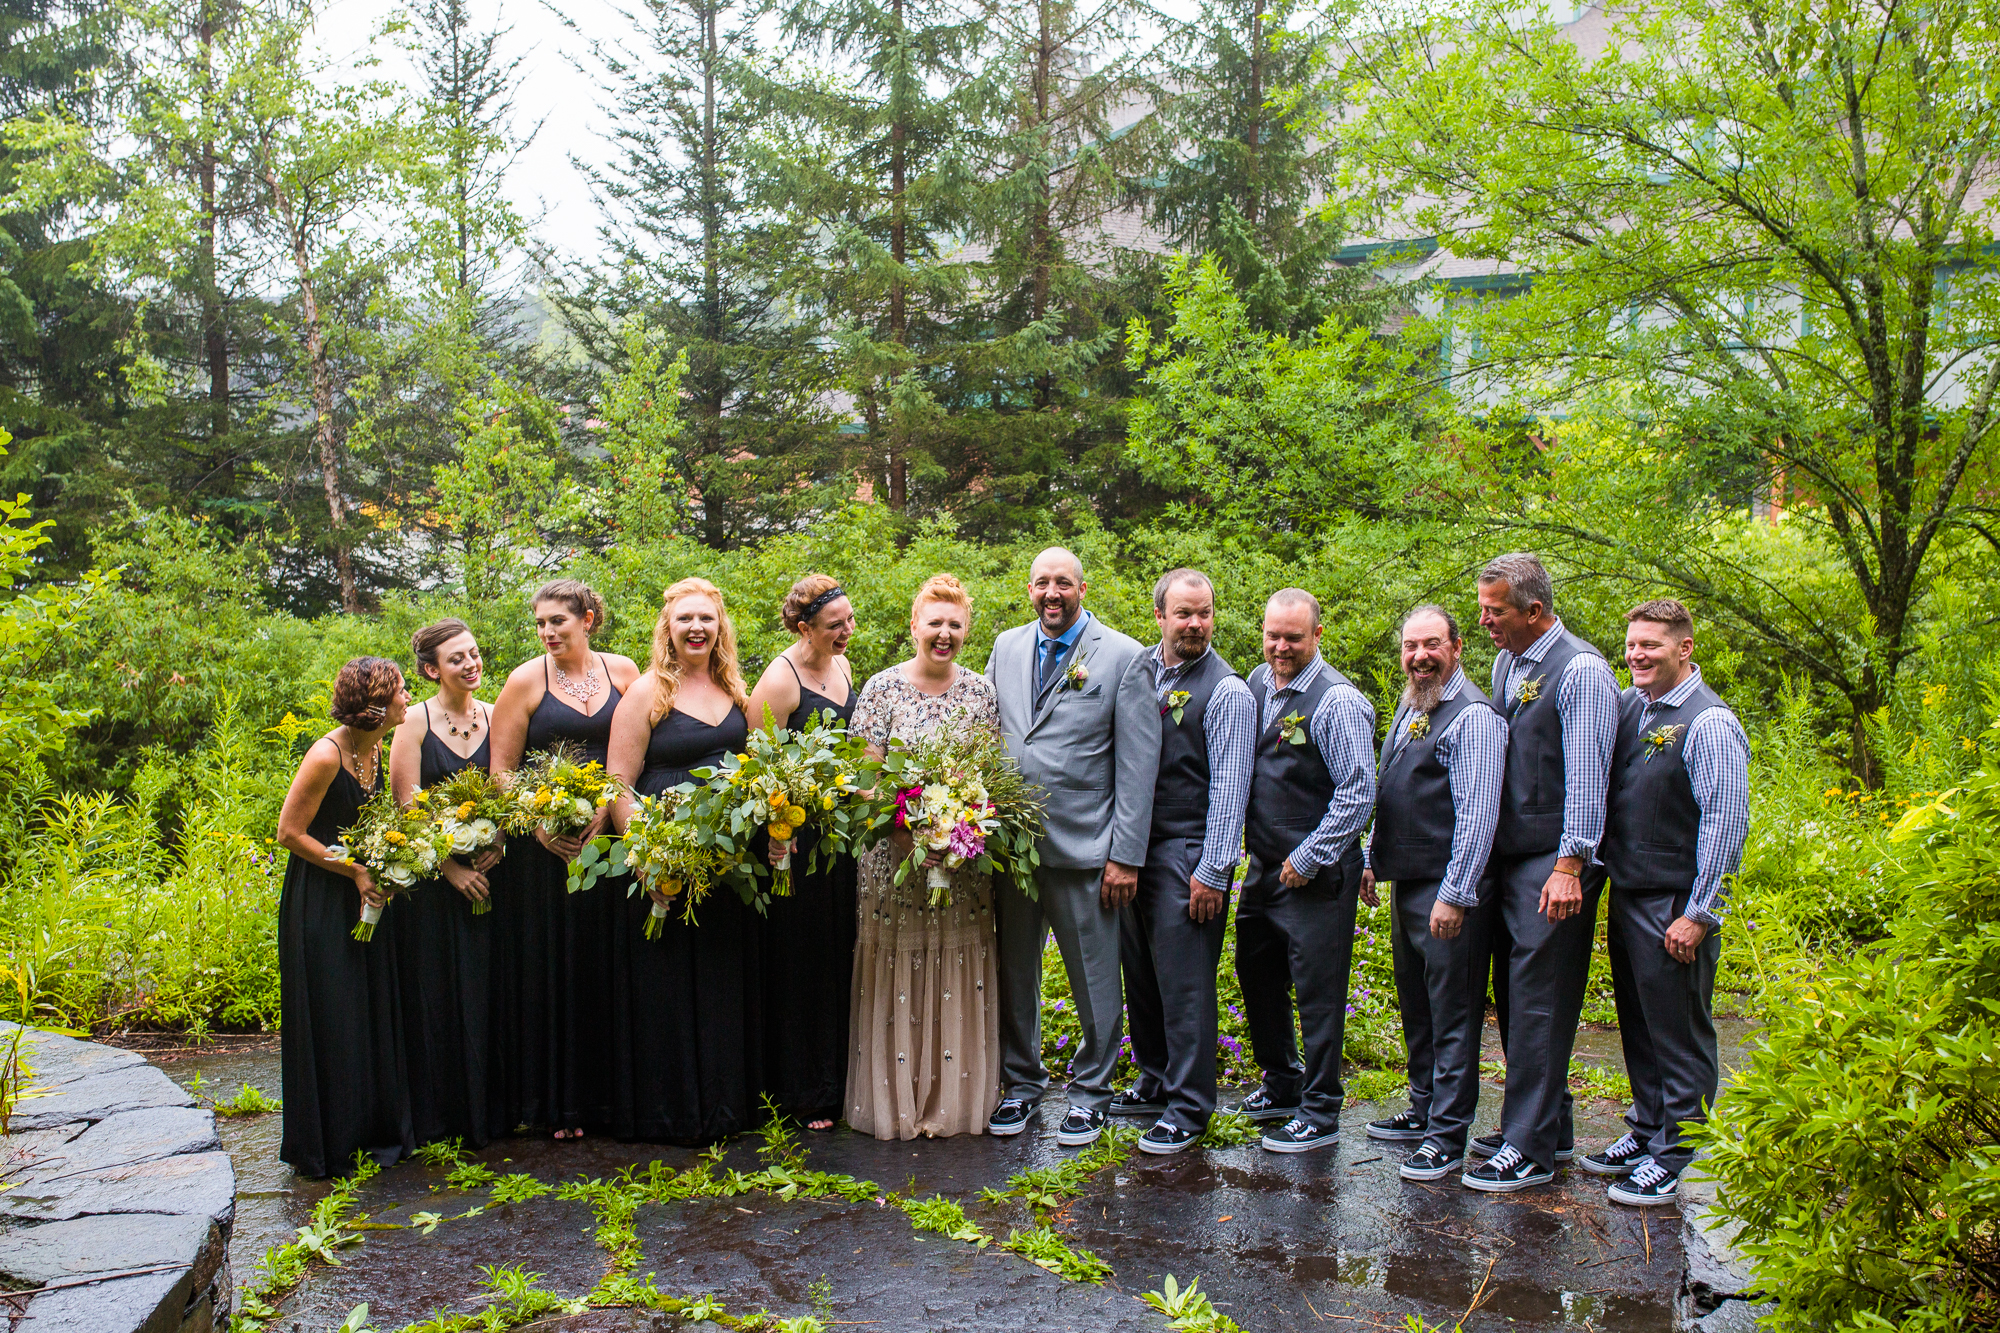 An entire wedding party stand in a line for a photo.